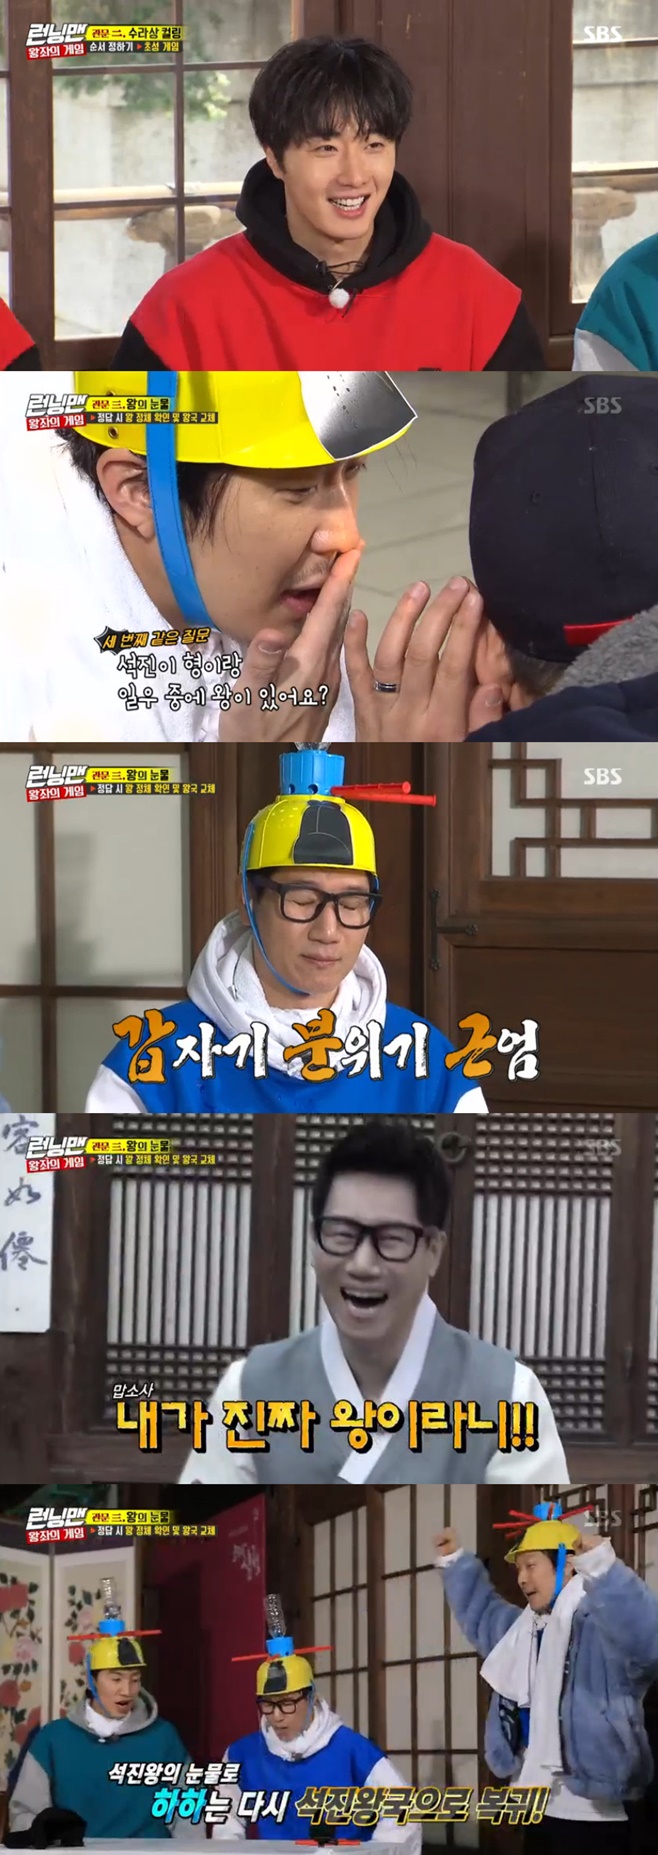 The real king of Running Man was Ji Suk-jin.On the SBS entertainment program Running Man, which was broadcast on the evening of the 3rd, Jung Il-woo, Go Ah-ra, Kwon Yul, and Park Hoon appeared and struggled to find the members (Yoo Jae-Suk Ji Suk-jin Yang Se-chan Kim Jong-kook Haha Song Jihyo Lee Kwang Soo Jeon So-min) and the real king.The cast responded to the mission, Tell me five actors who played the role of king or prince in five seconds.The first hand, Haha, said, Jung Tae-woo, Yeo Jin-gu, Hong Seok-cheon.Yang Se-chan shouted Hong Seok-cheon next to each cast member to give the answer, and worked on the sabotage.Haha, who re-challenged to get the right answer, got the chance to ask the production team for a hint: Jung Il-woo, who saw Haha going forward to get a hint, said, You know why Im quiet?Kim Jong-kook, who succeeded in the quiz, also asked the production team, Who is the real king among Jeon So-min, Jung Il-woo?Kim Jong-kook was convinced that Ji Suk-jin was the real king at the words no king.Haha said, This country is a ruined place, but the real king is Ji Suk-jin.